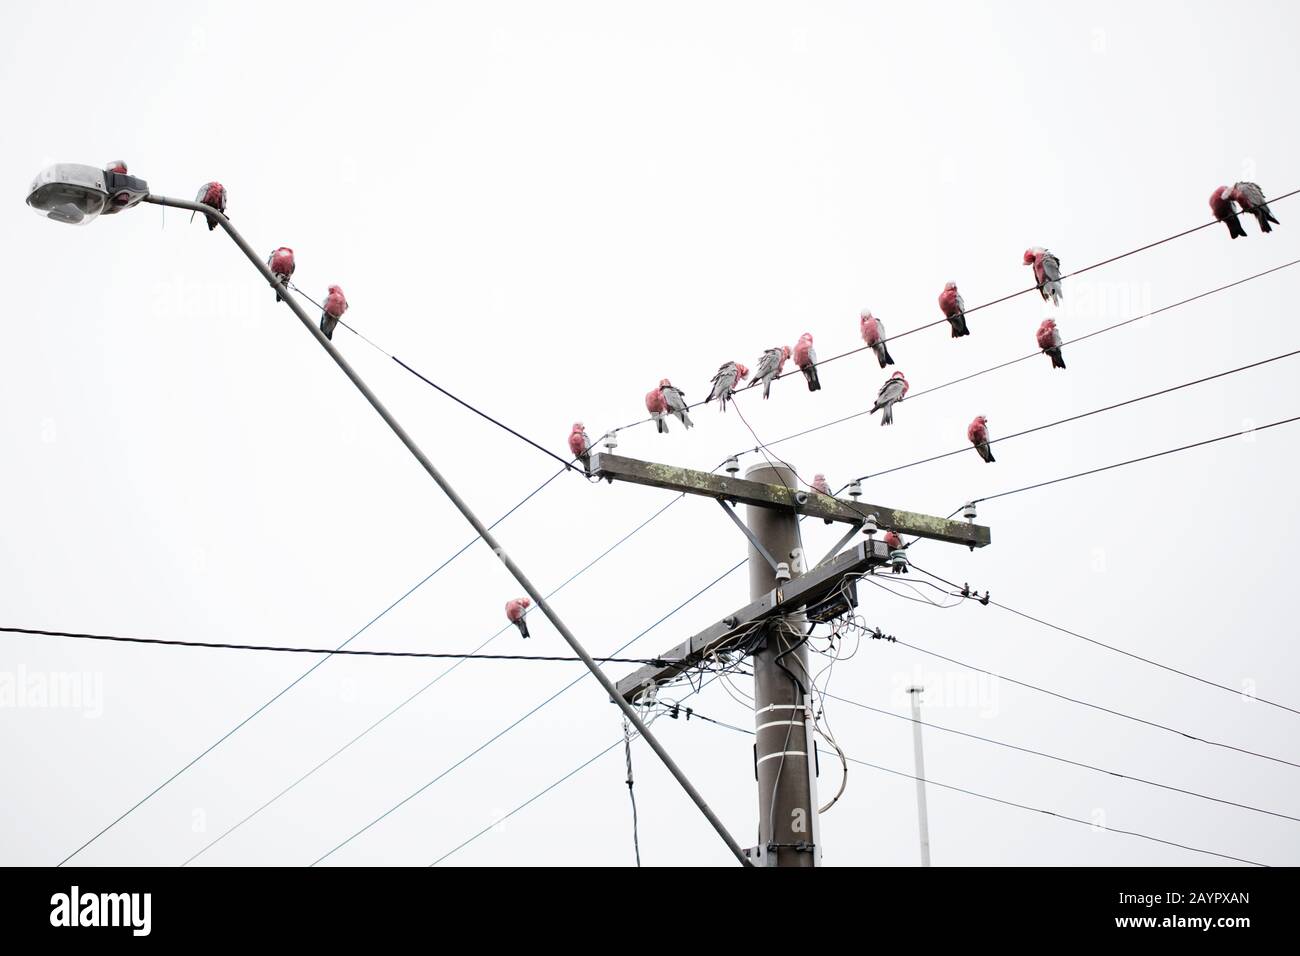 Australian pink and grey galahs (Eolophus roseicapilla) in a flock sitting on a telephone electrical wire pole on a cloudy day Stock Photo